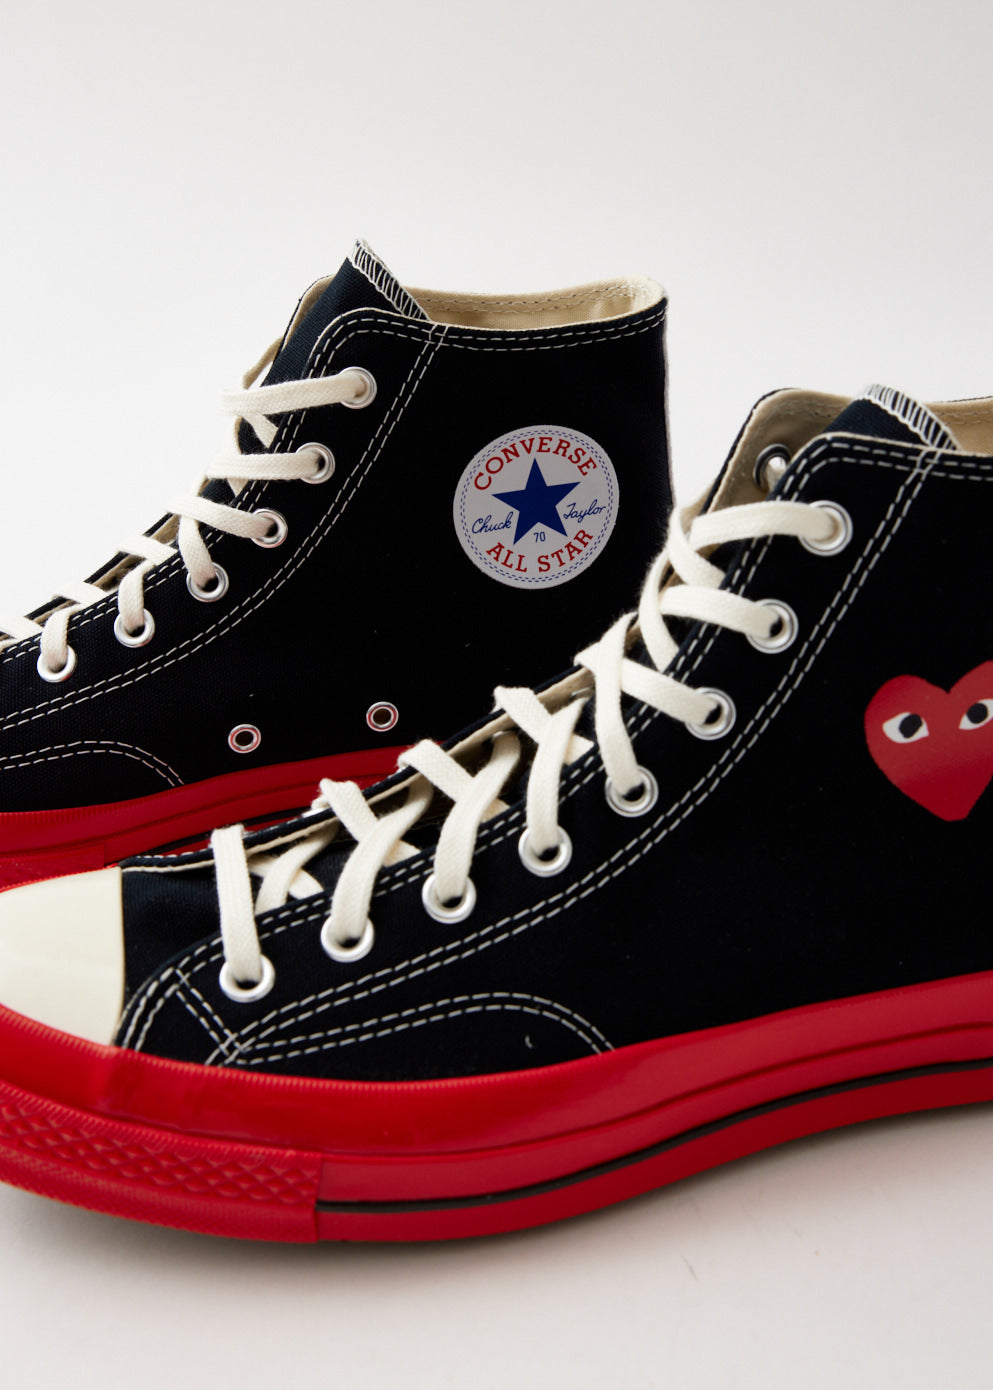 x Converse Red Sole High Top